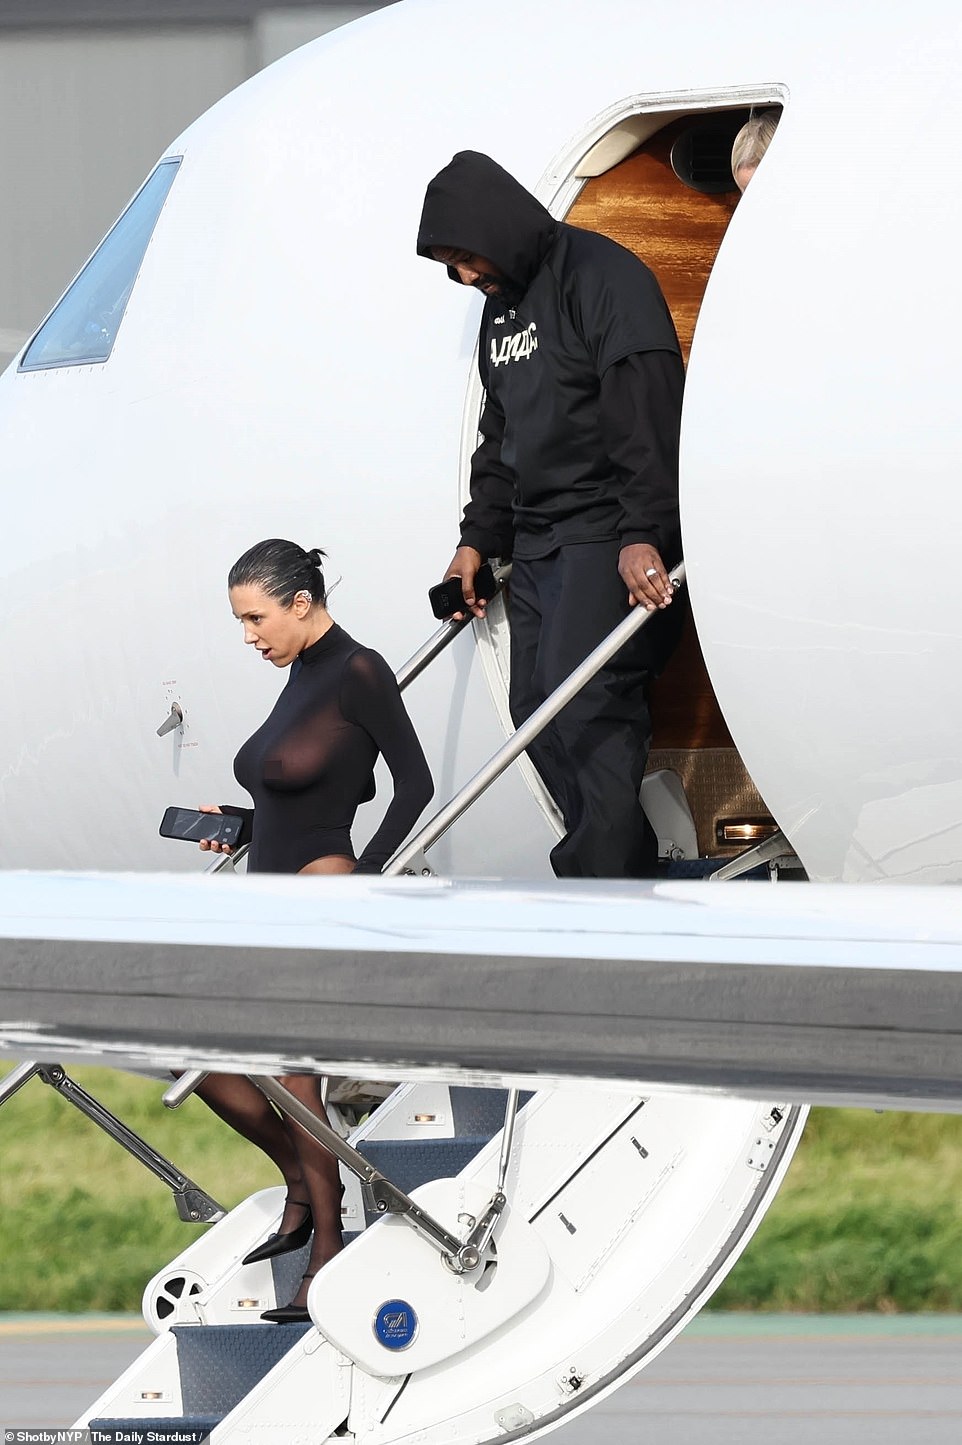 Kanye West's Australian wife Bianca Censori put on another scandalous display as she exited a private jet with her husband in Los Angeles on Wednesday.